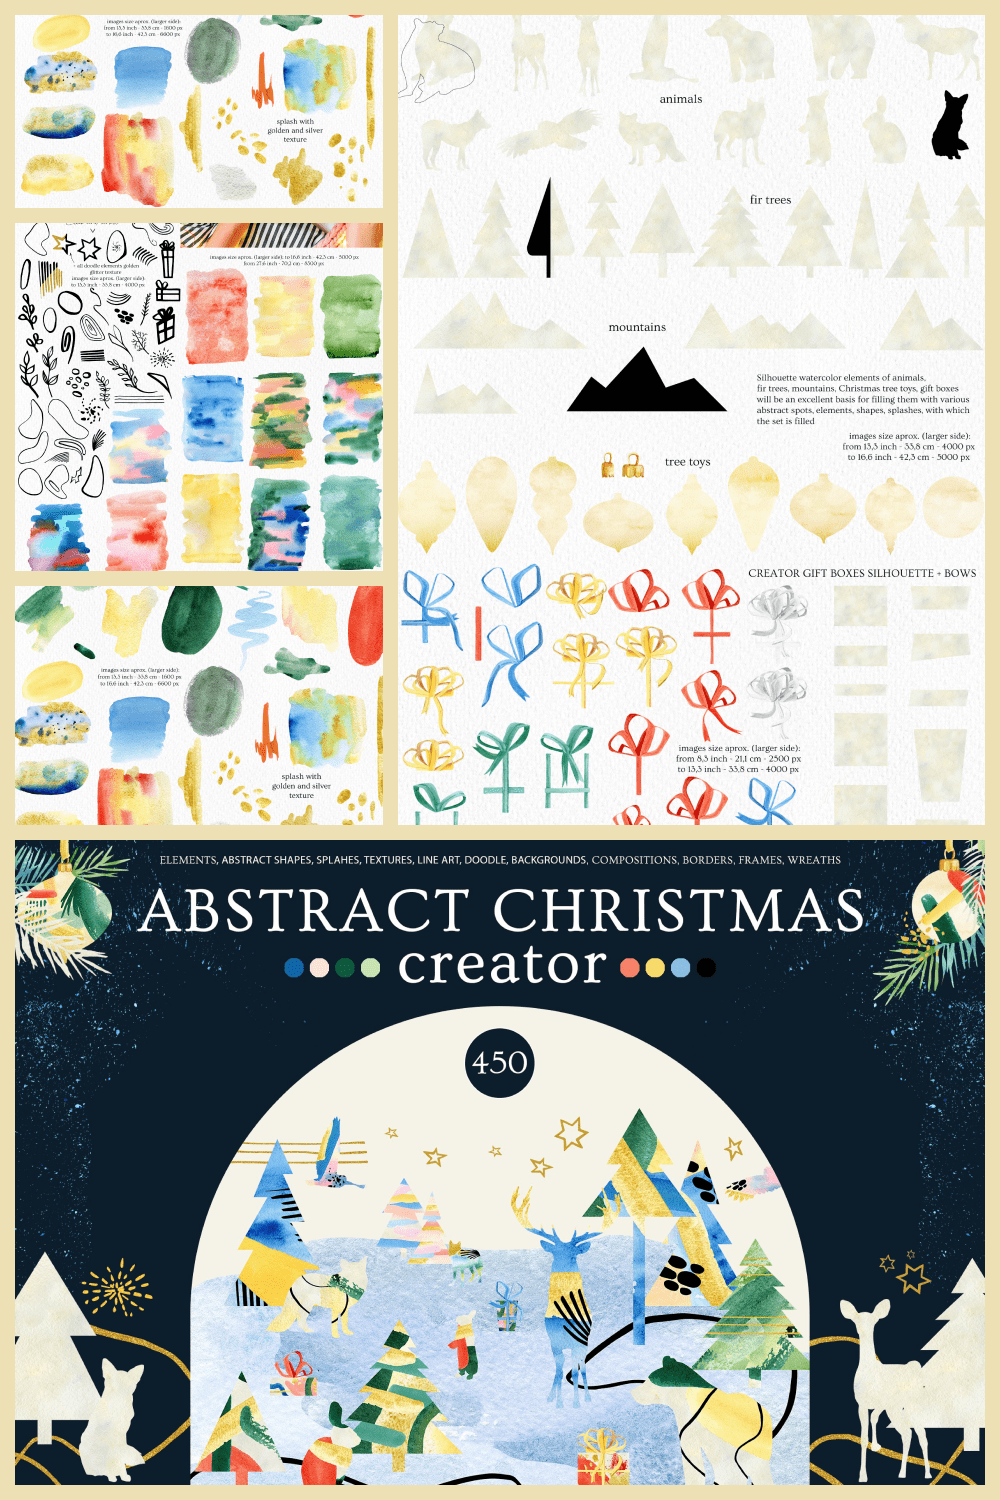 Collage of Christmas trees, decorations, animals, gift boxes bows and watercolor strokes.